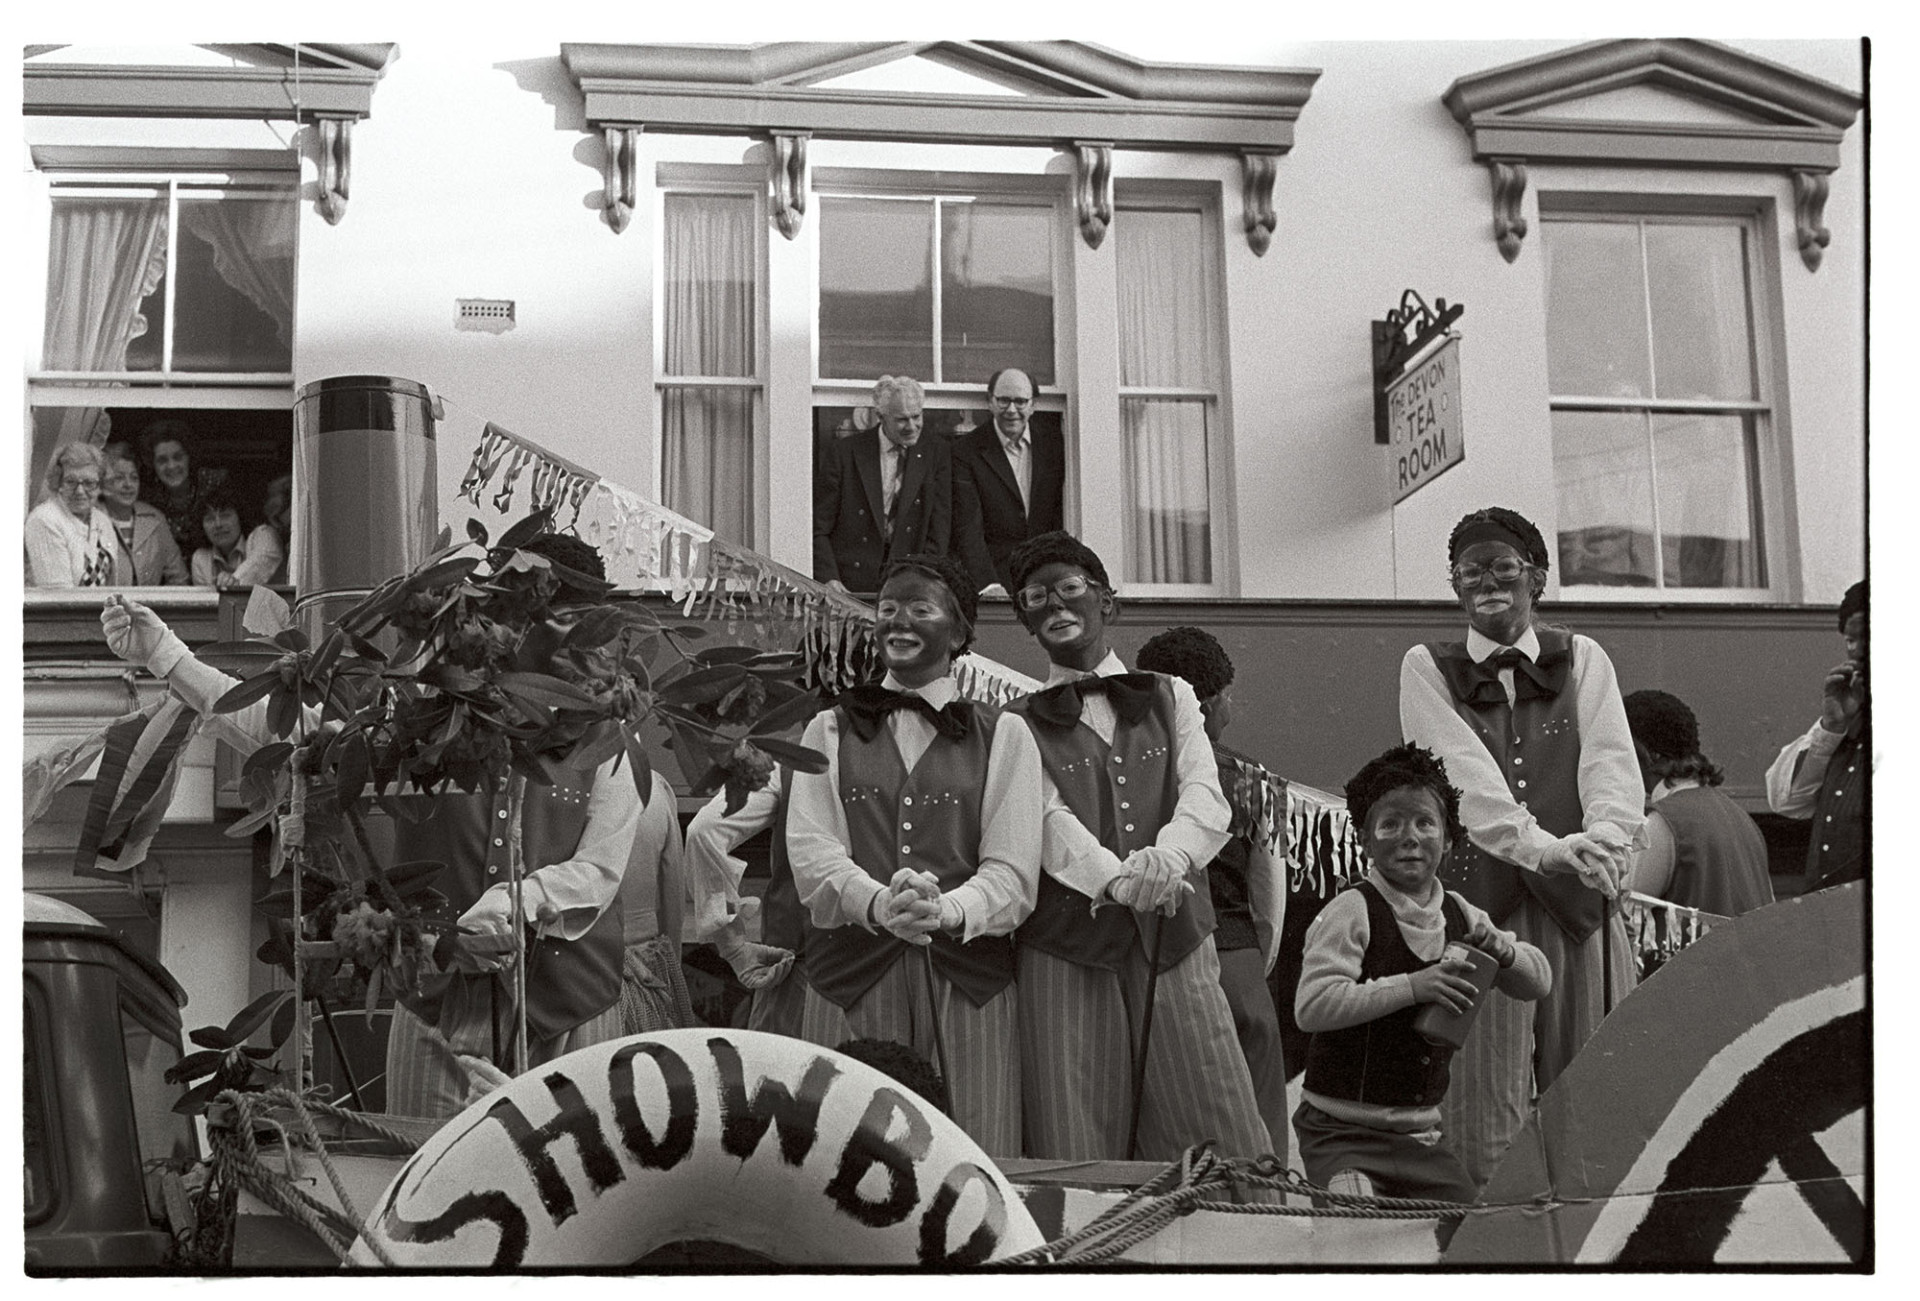 May Fair float. Showboat. Black and white minstrels.
[People dressed as minstrels on a float titled 'Showboat' at Torrington May Fair. Spectators are watching the parade from first floor windows of buildings along the street.]